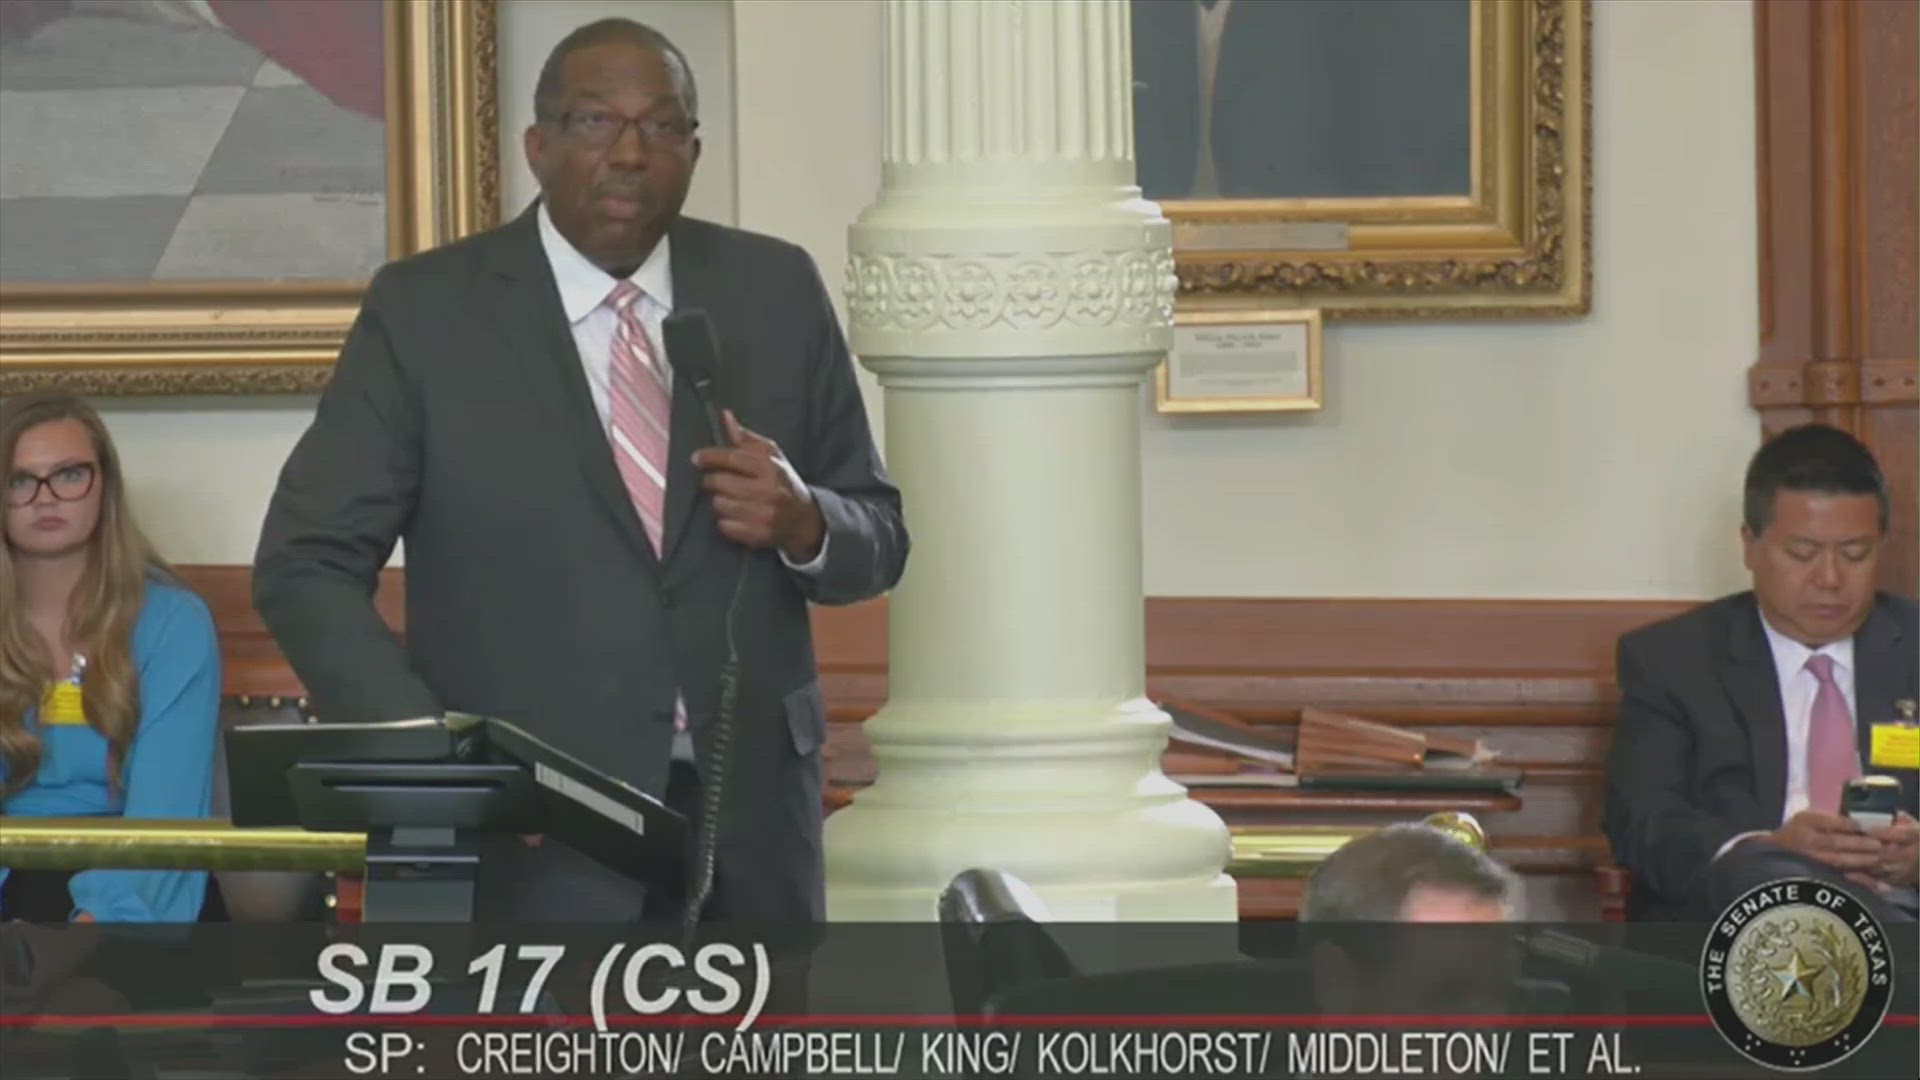 Senators are debating SB 17, which would ban Texas universities from having diversity, equity and inclusion offices.